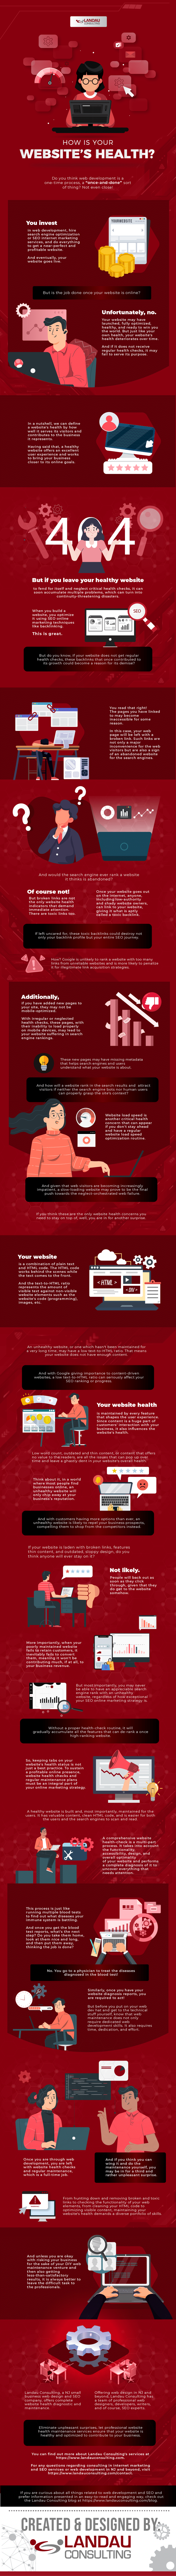 Infographic Image - How is your website healthNDUAW51